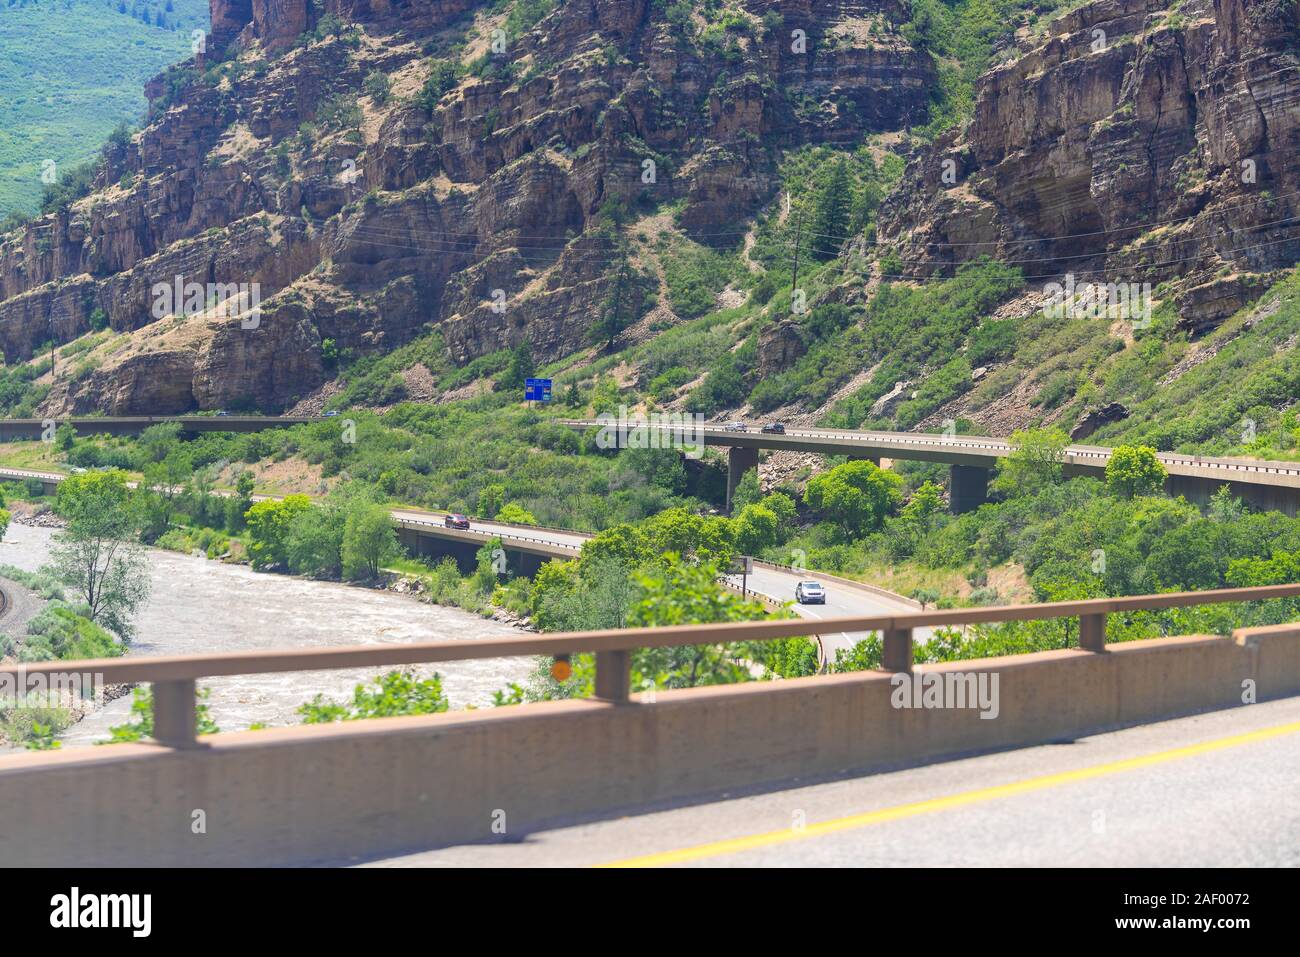 Glenwood Springs, USA - June 29, 2019: Glenwood Canyon on i70 interstate  freeway highway through Colorado towns with cliffs and cars in traffic on  roa Stock Photo - Alamy